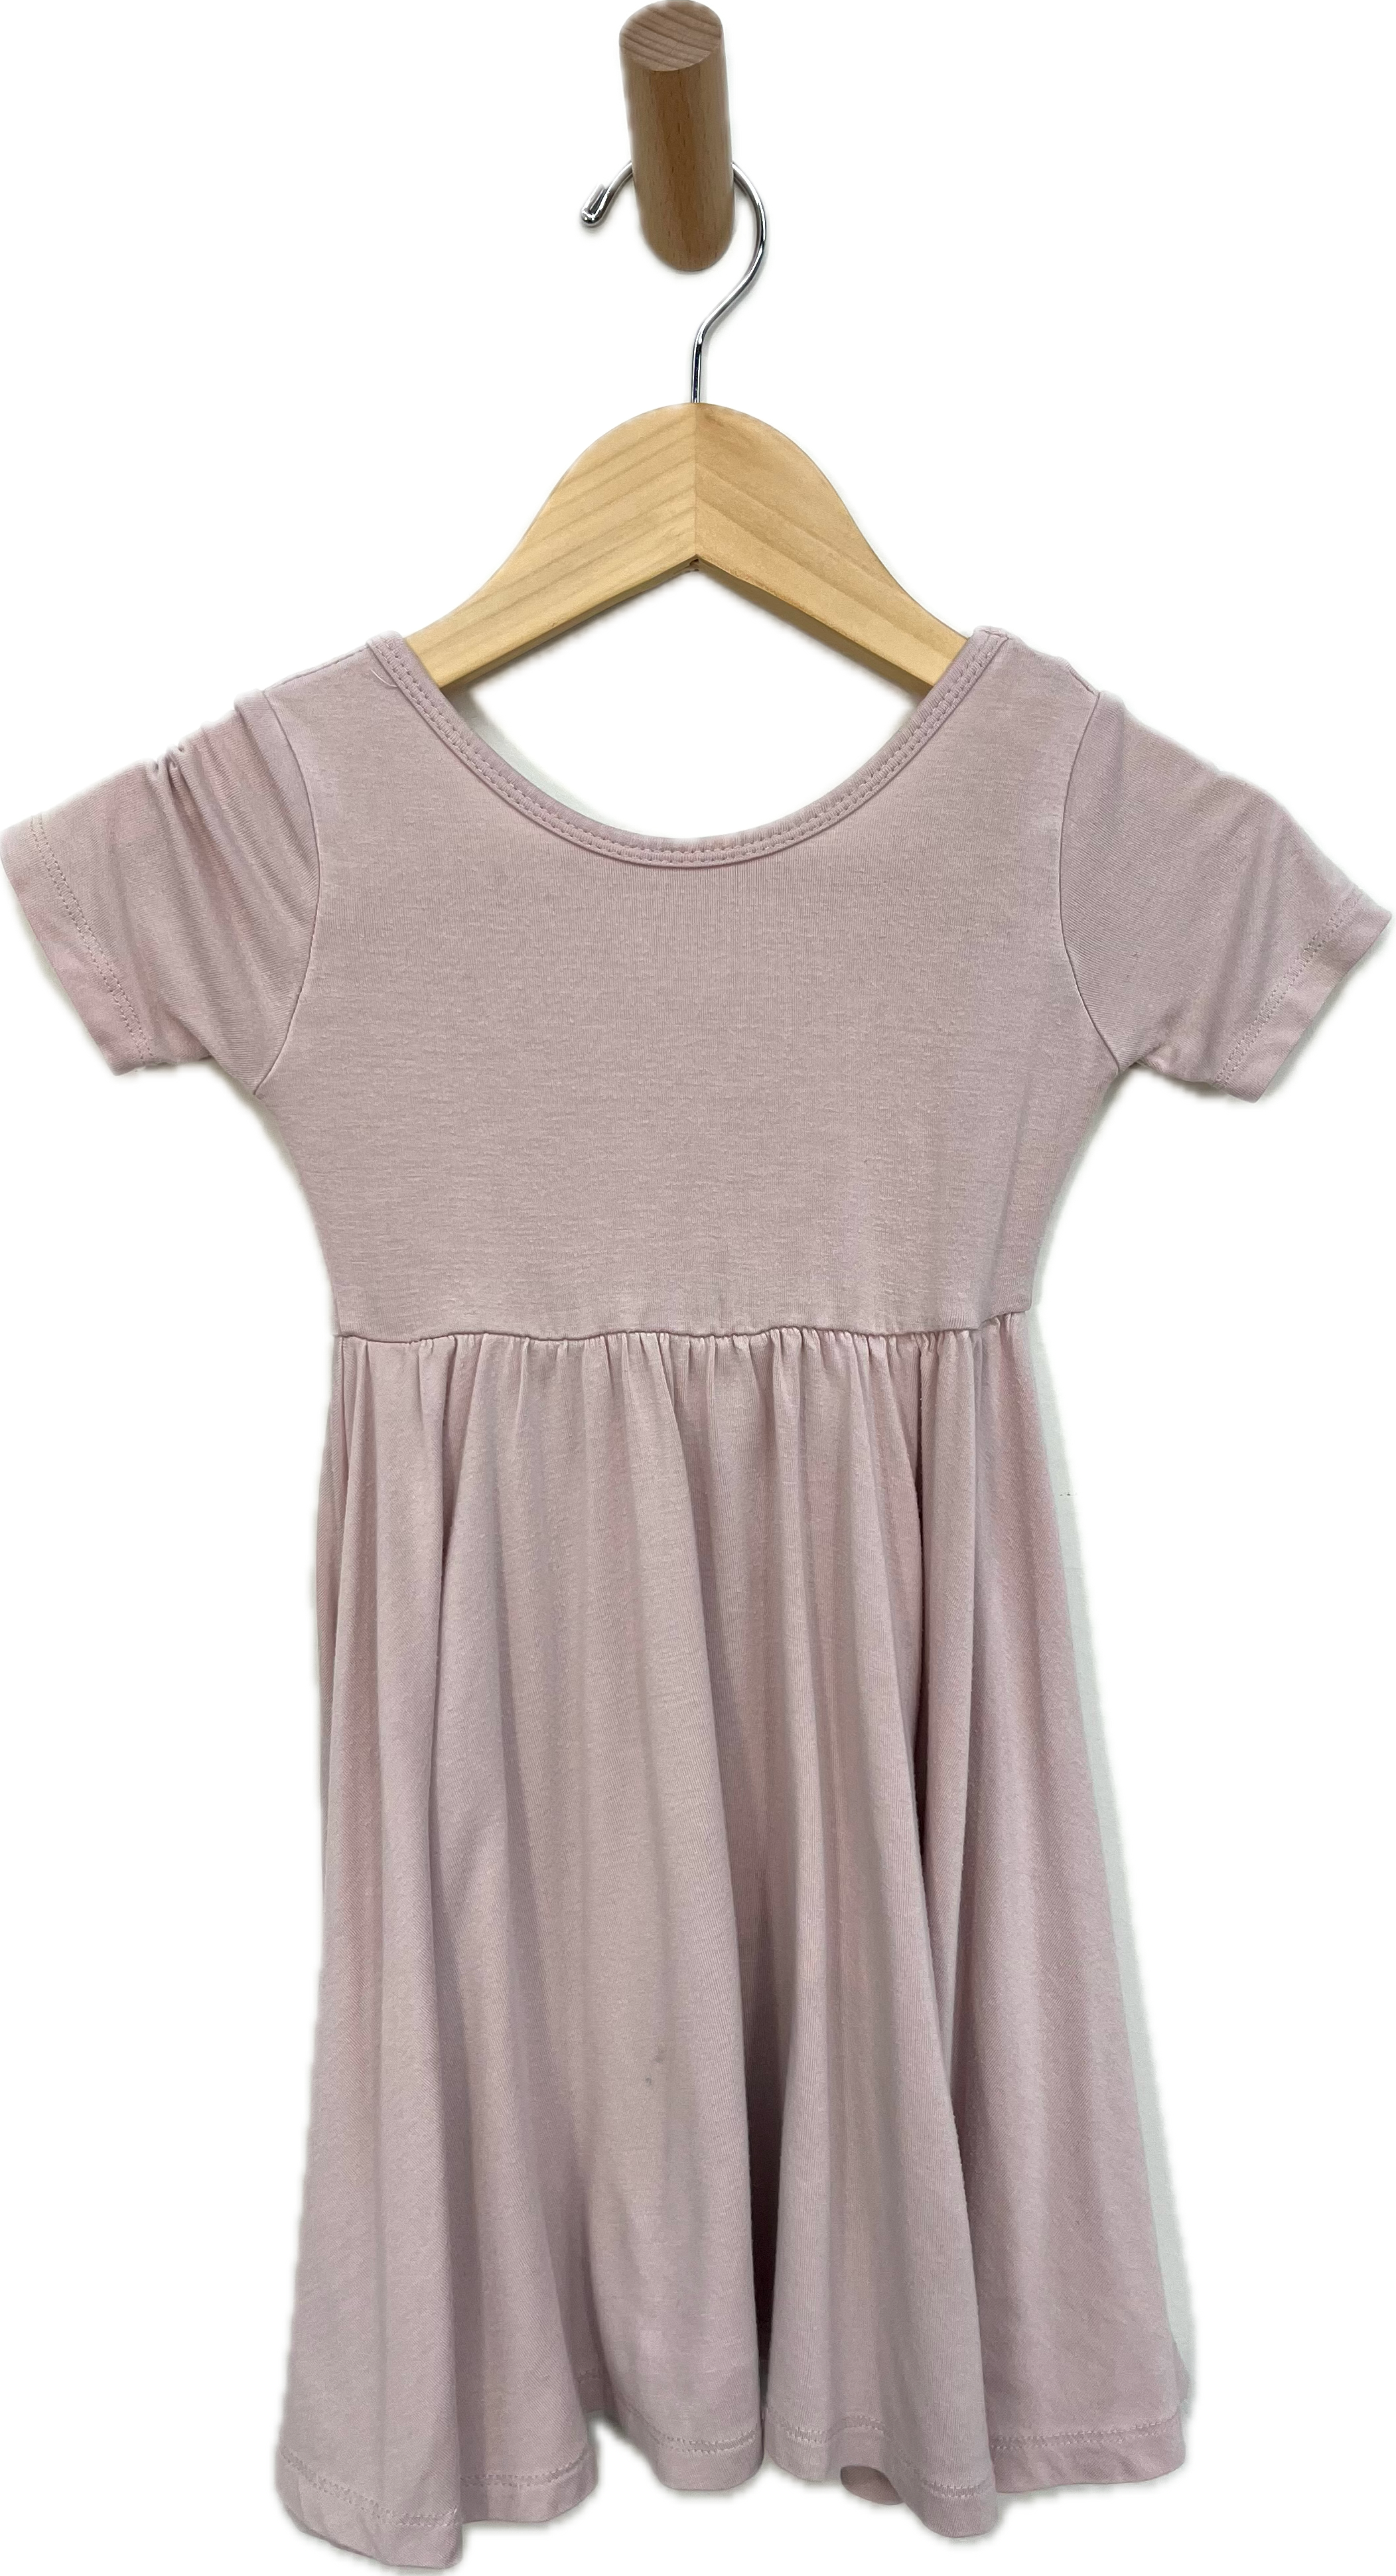 kyte twirl dress blush 2T (pilled, blue stain on front)